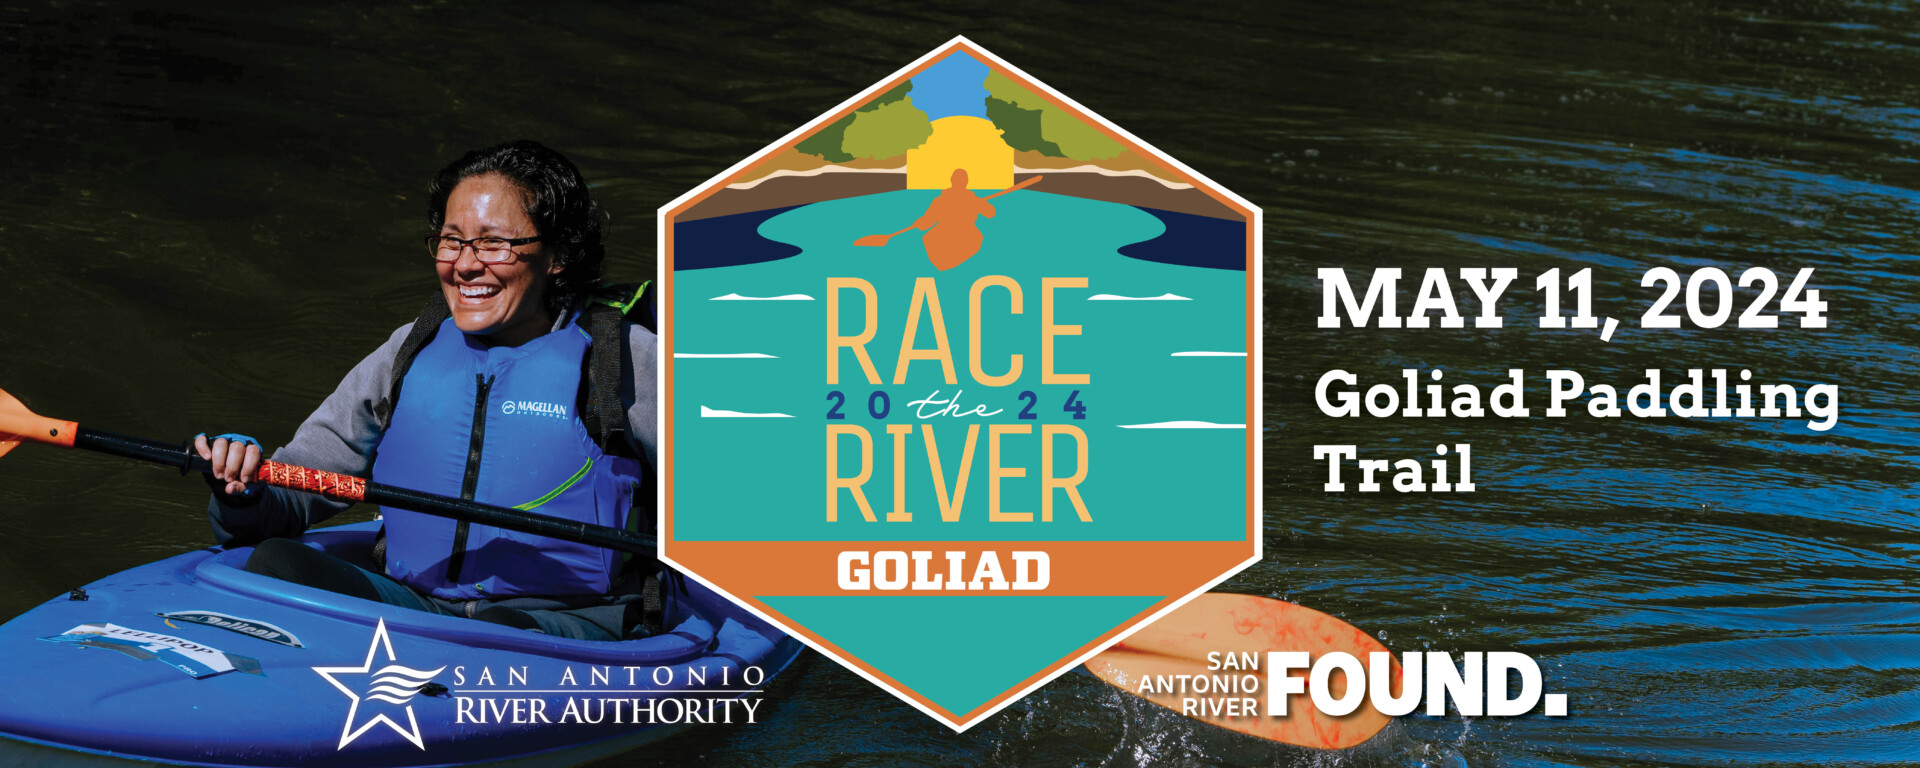 Race the River Goliad